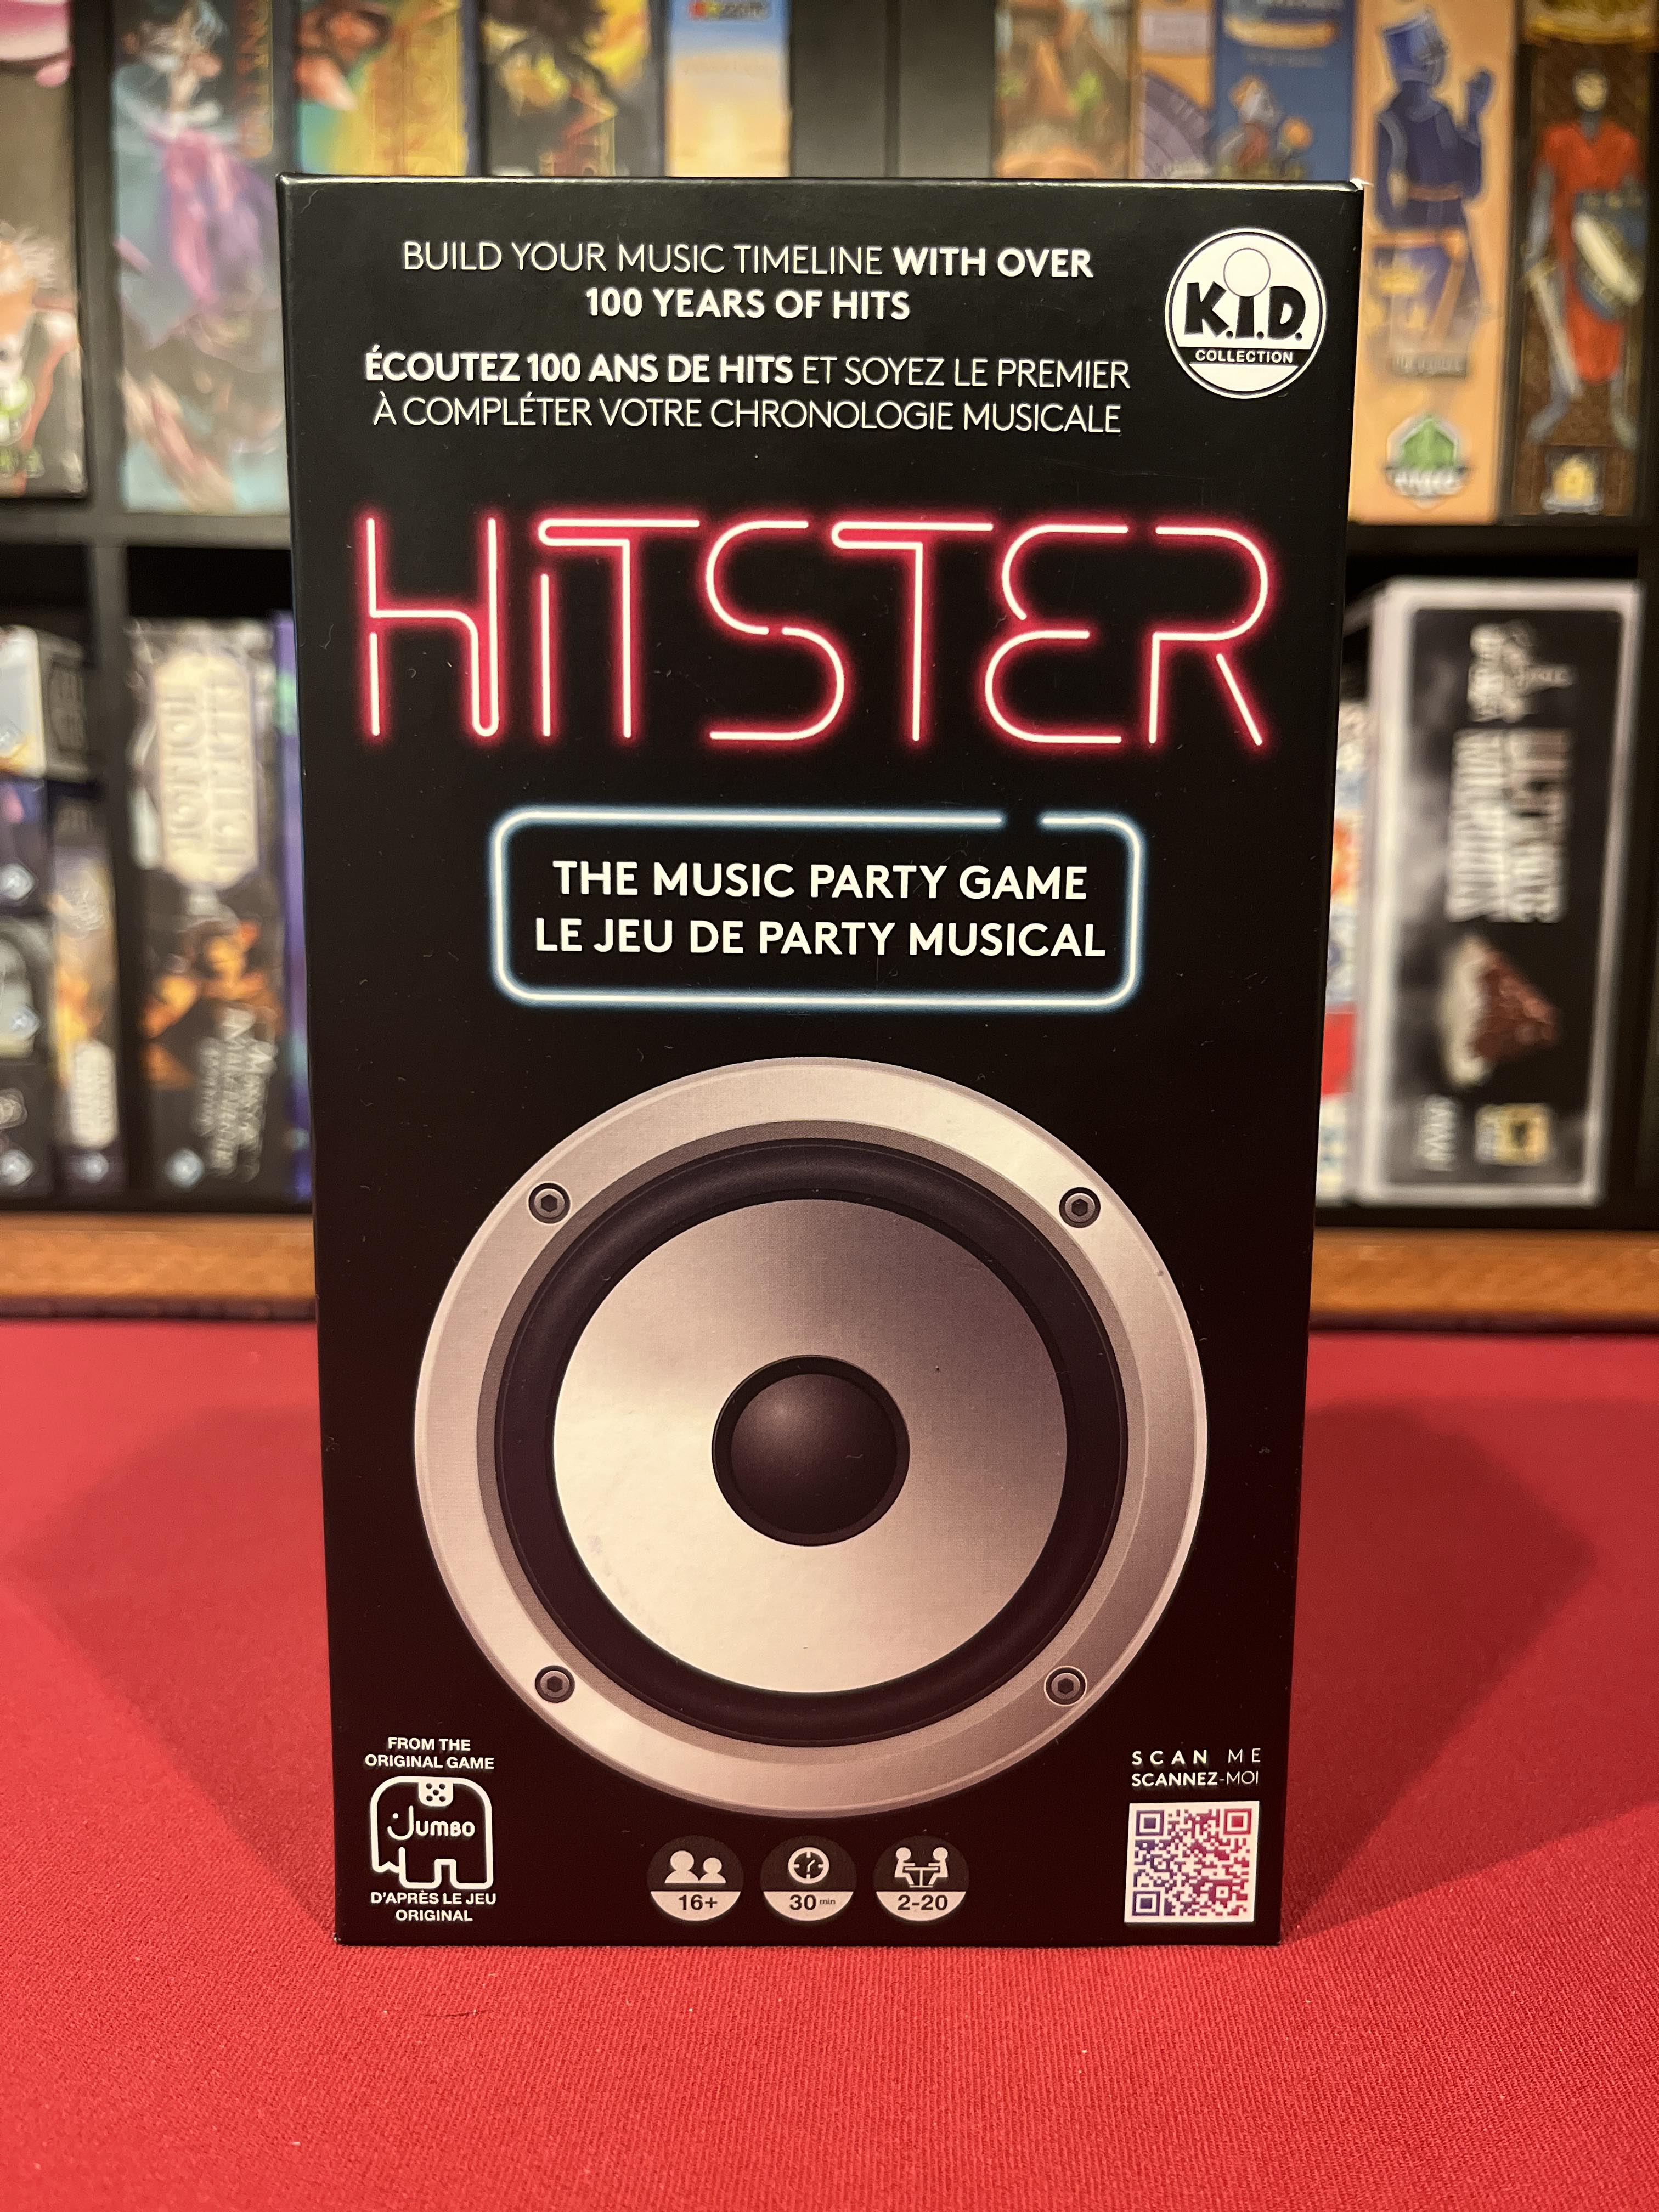 HITSTER: more than a feeling, it's pure pleasure! – L'As des jeux